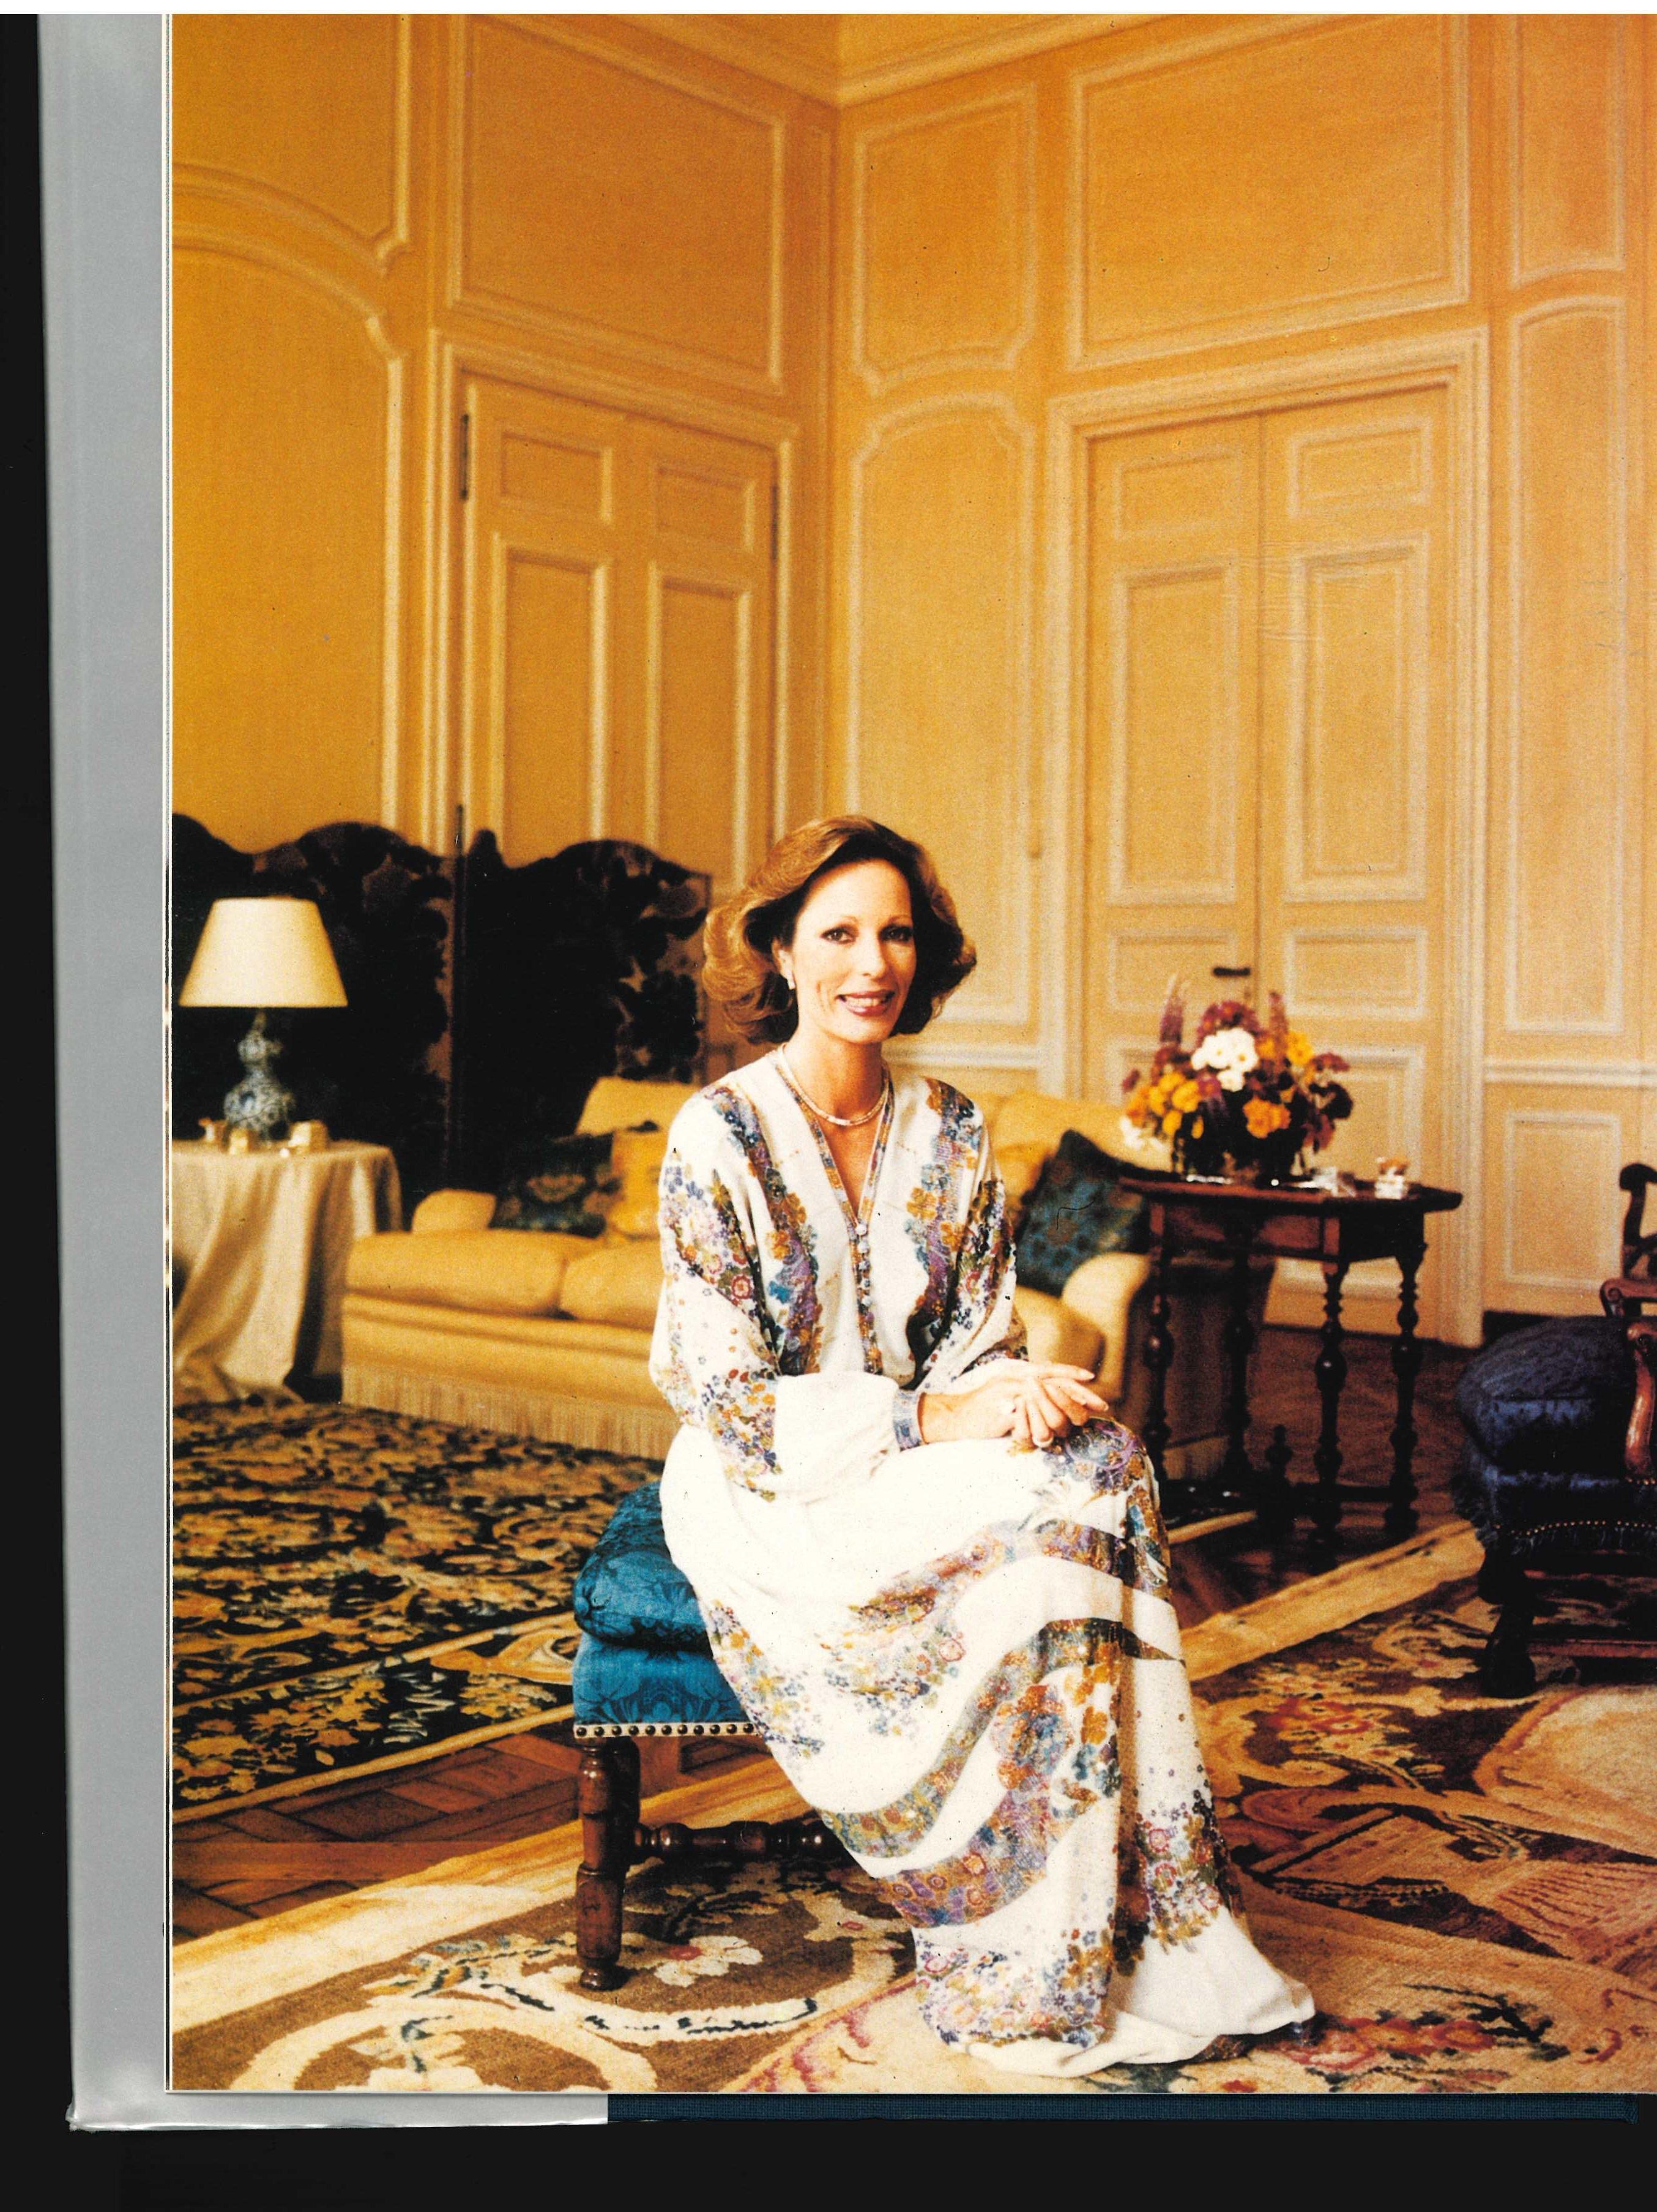 This hardback catalogue dates from November 1995, produced by Christie's for the sale of the private collection of Princess Salimah Aga Khan. 261 lots, all of which are photographed and illustrated in colour together with a brief description. A